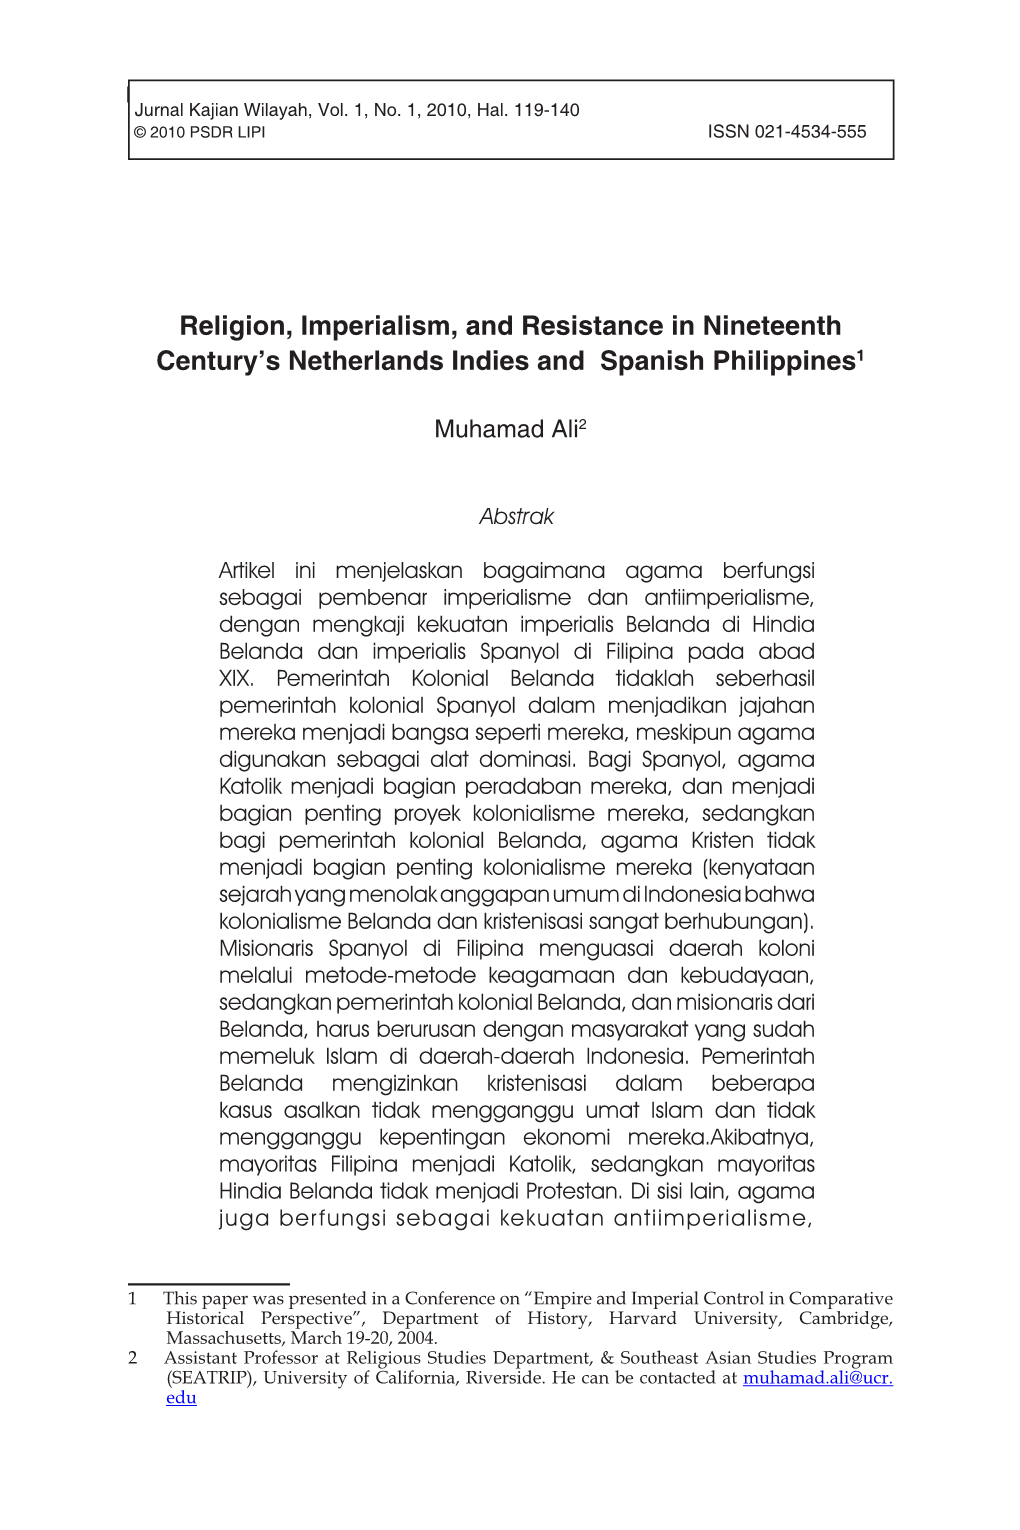 Religion, Imperialism, and Resistance in Nineteenth Century's